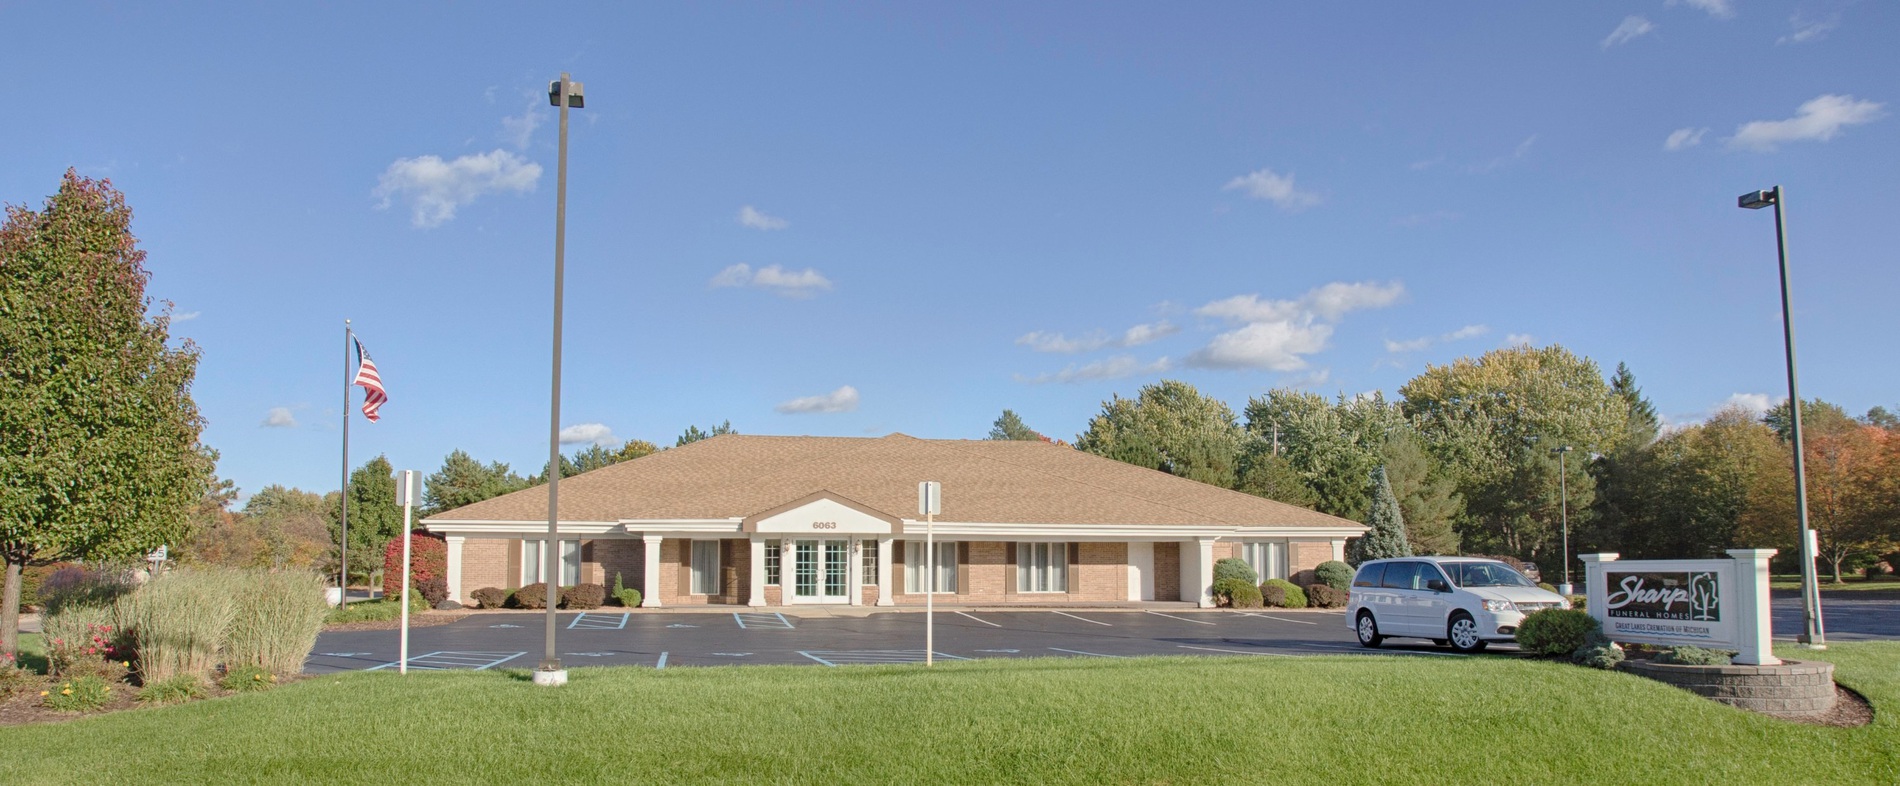 Images Sharp Funeral Home & Cremation Center